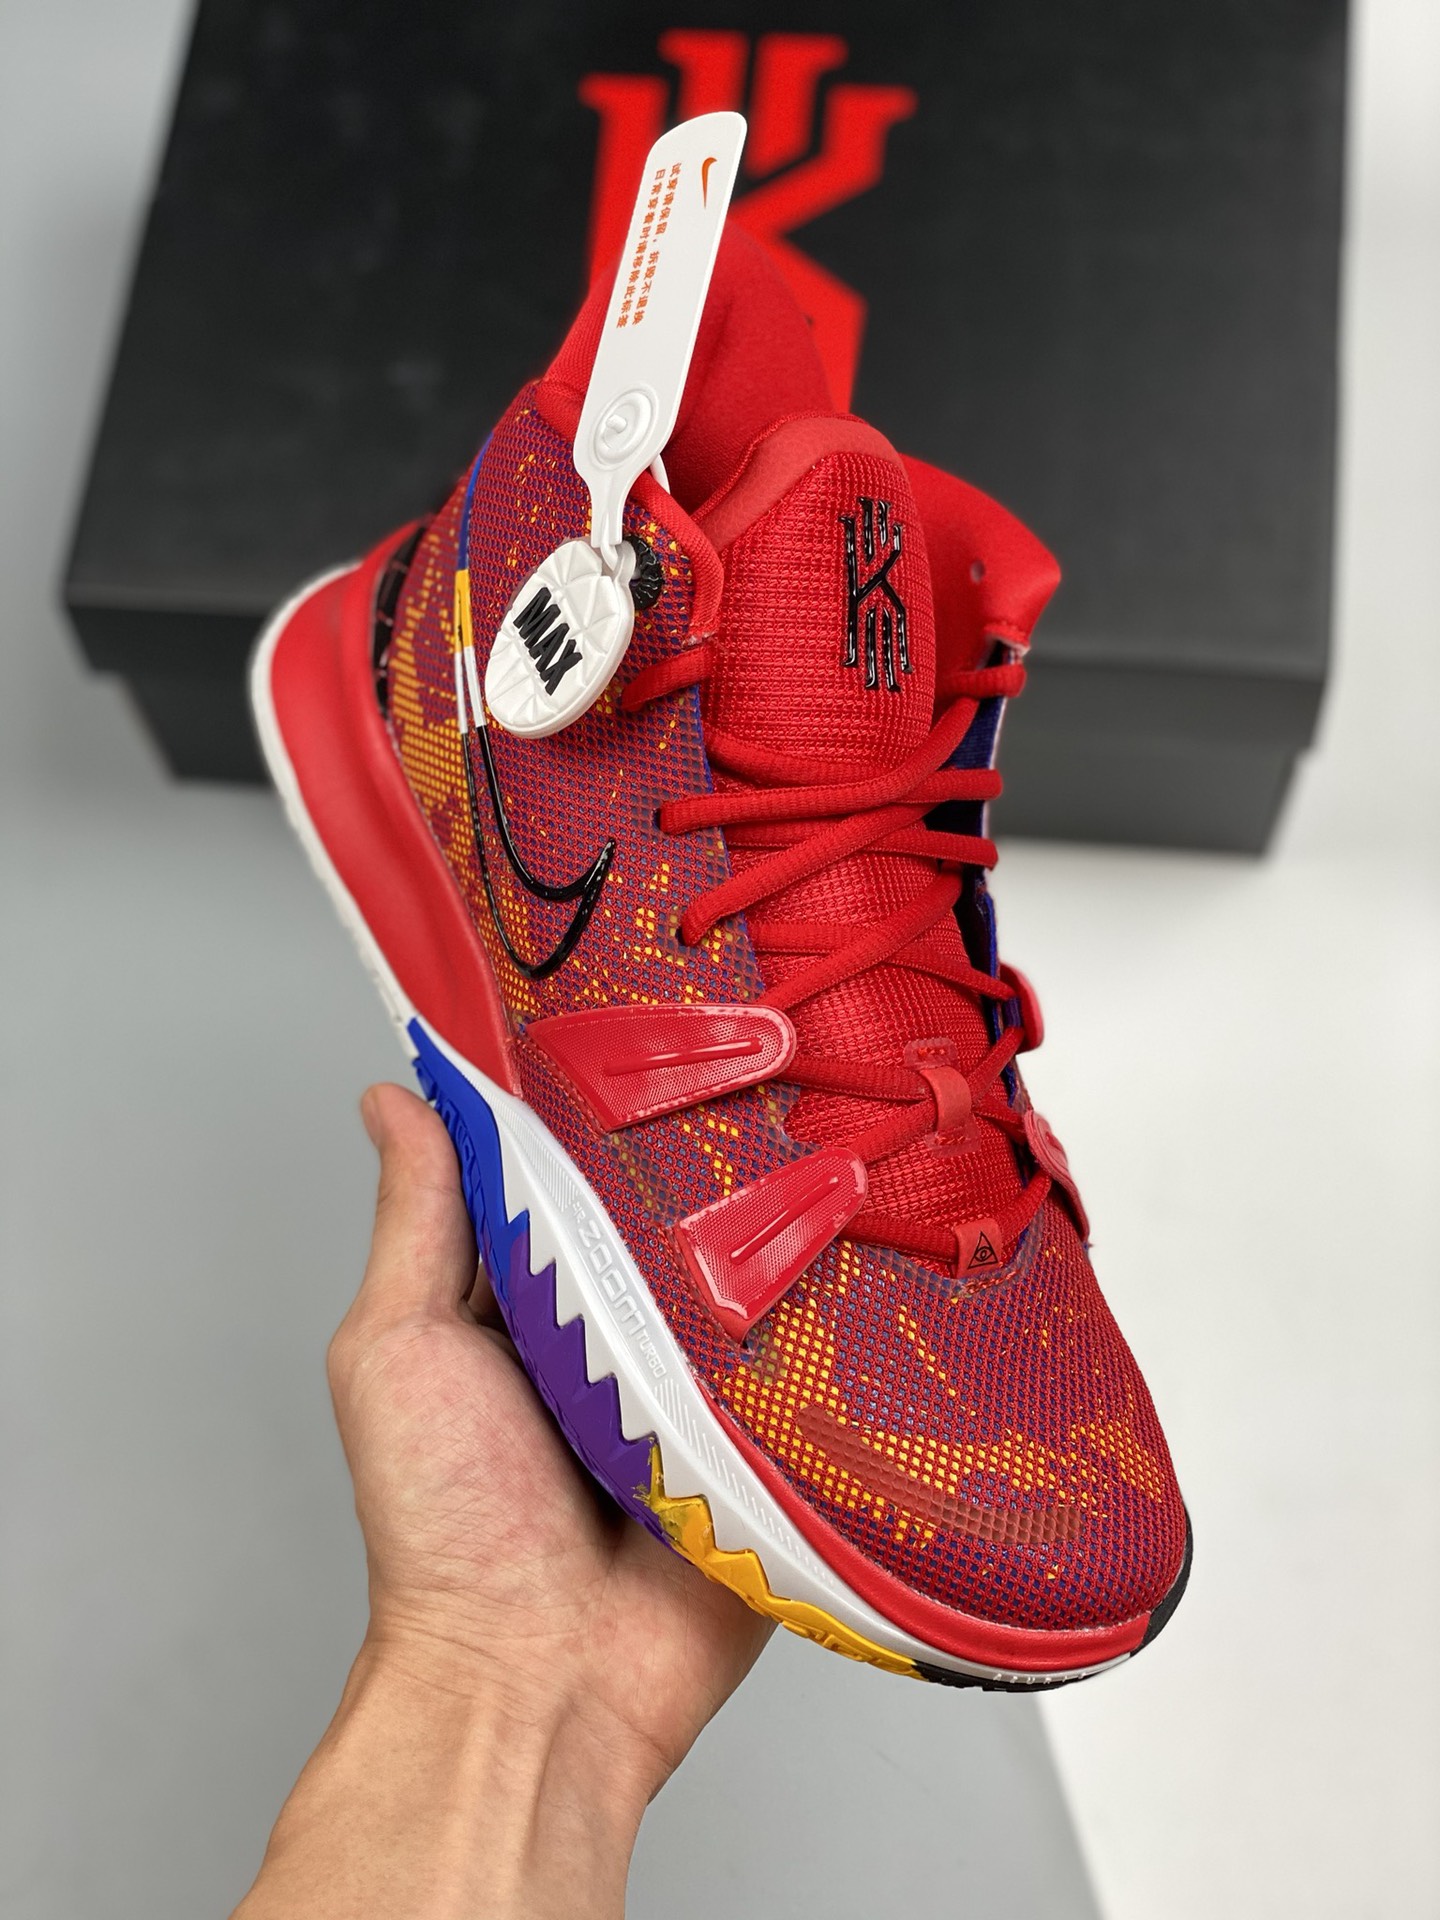 Nike Kyrie 7 "Icons of Sport" DC0589-600 Shoes